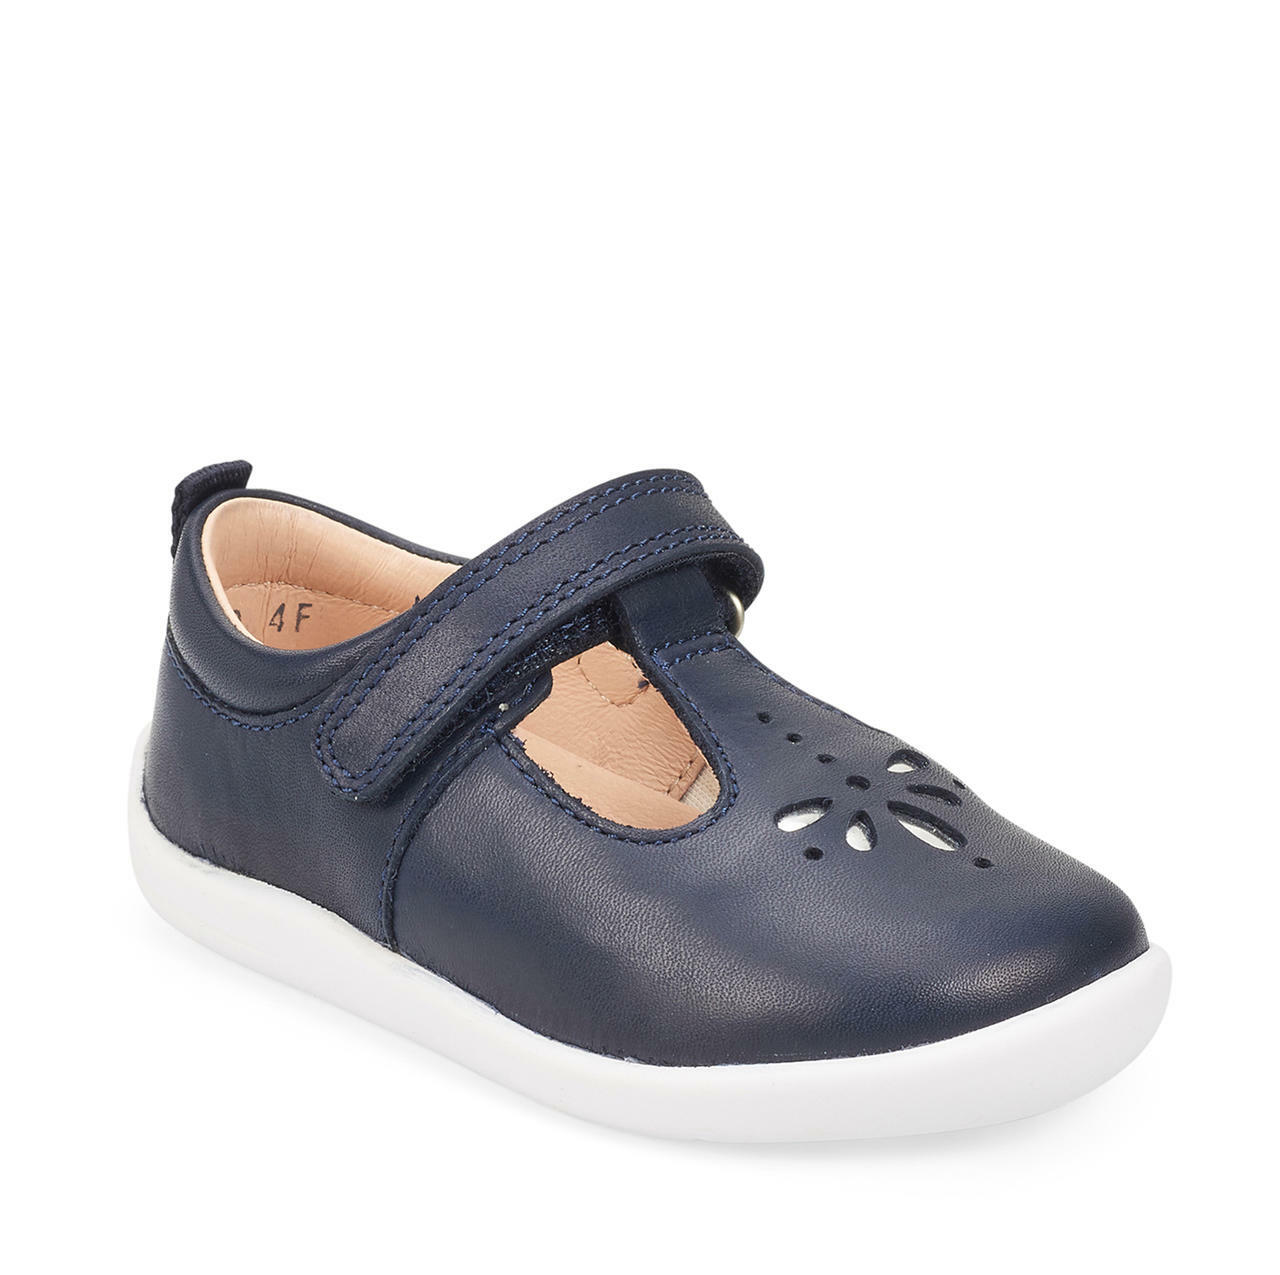 StartRite Puzzle 0779_9 Girls Navy Leather Touch Fastening First Shoes